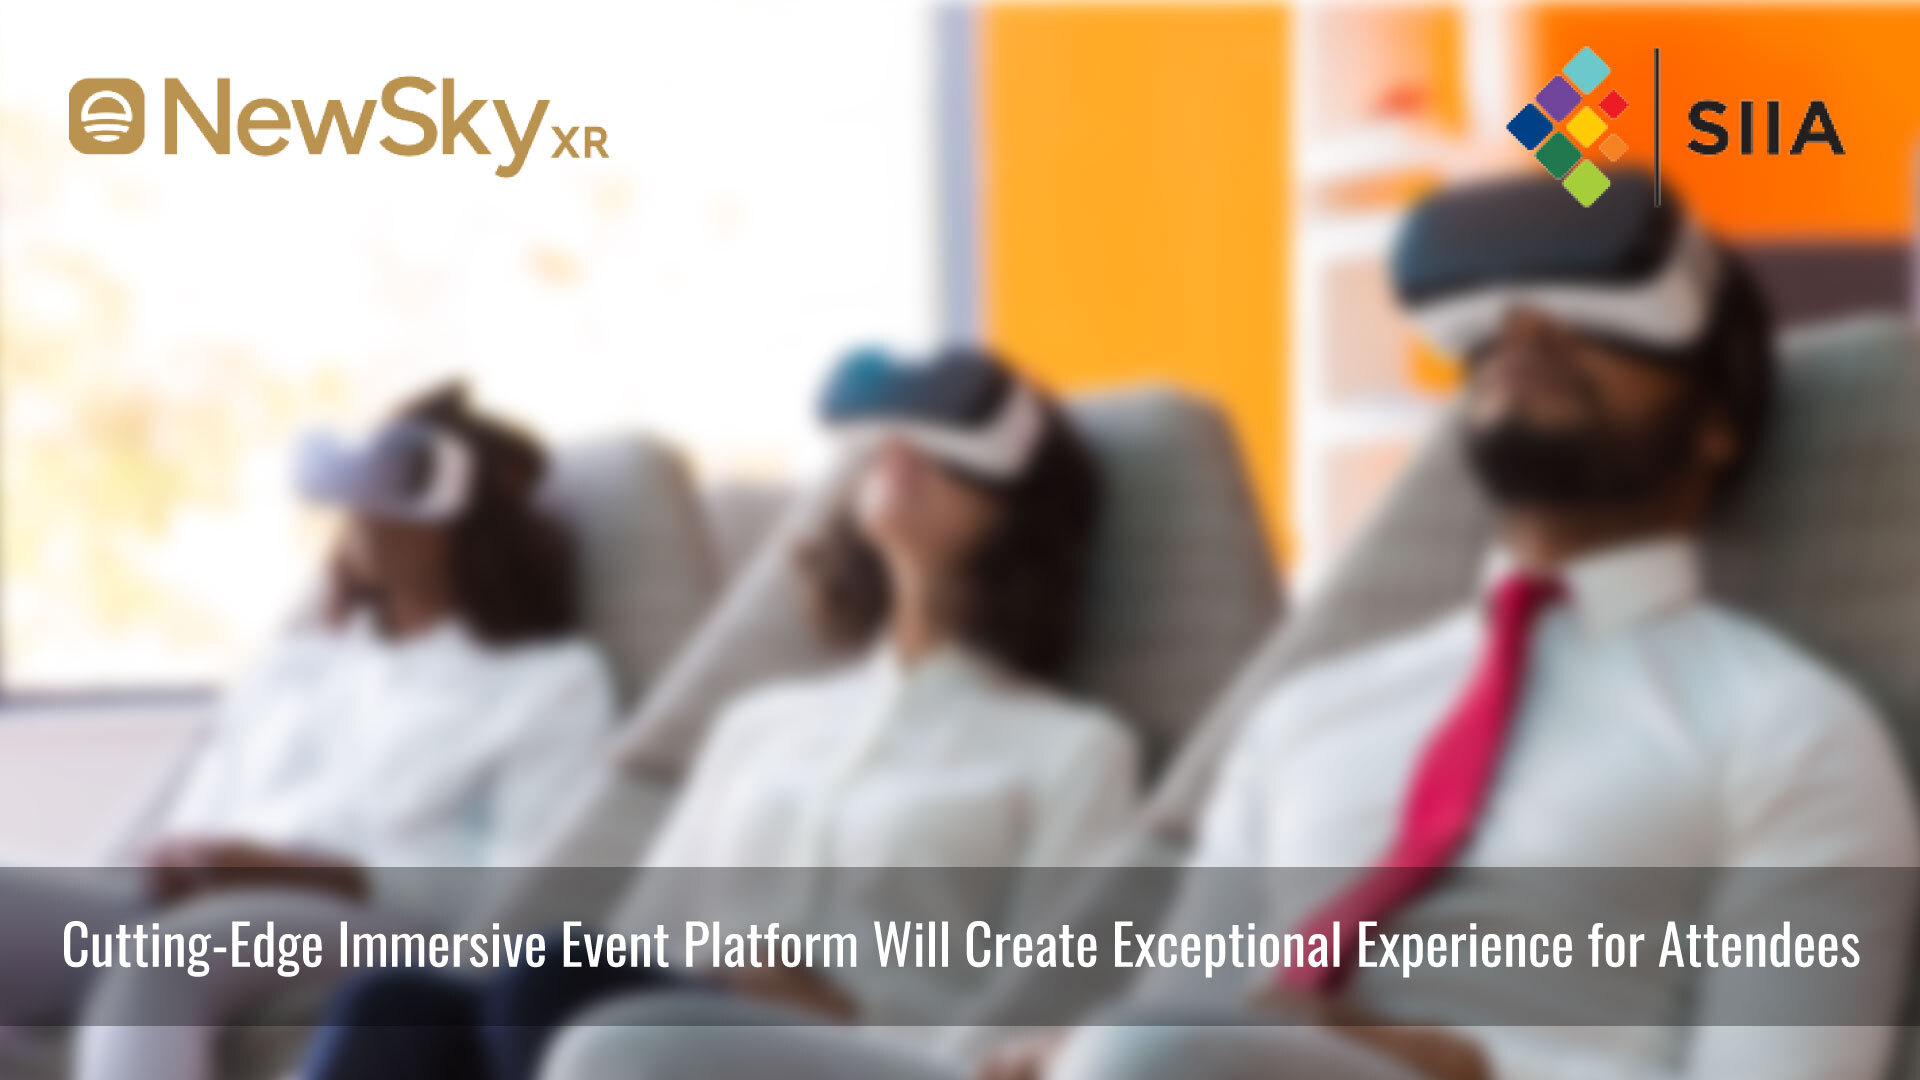 NewSky XR Brings the Software & Information Industry Association (SIIA) Virtual CODiE Awards Celebration into the Metaverse